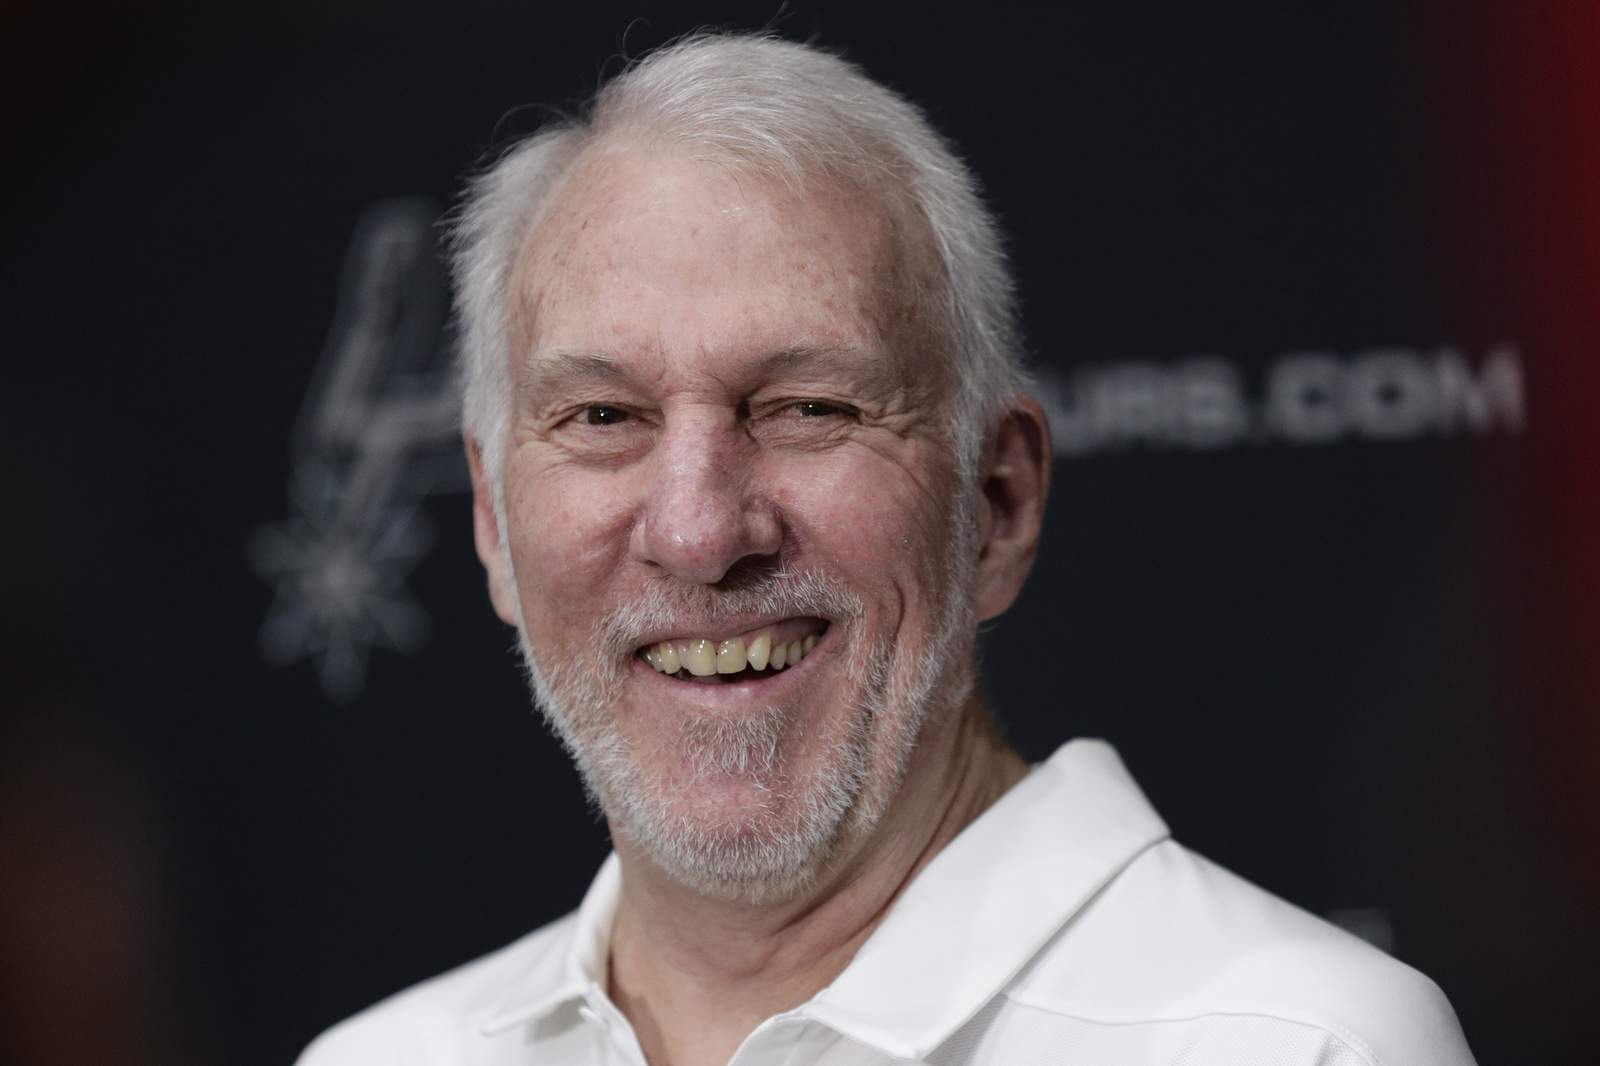 Popovich had reservations, but Spurs coach ready for restart